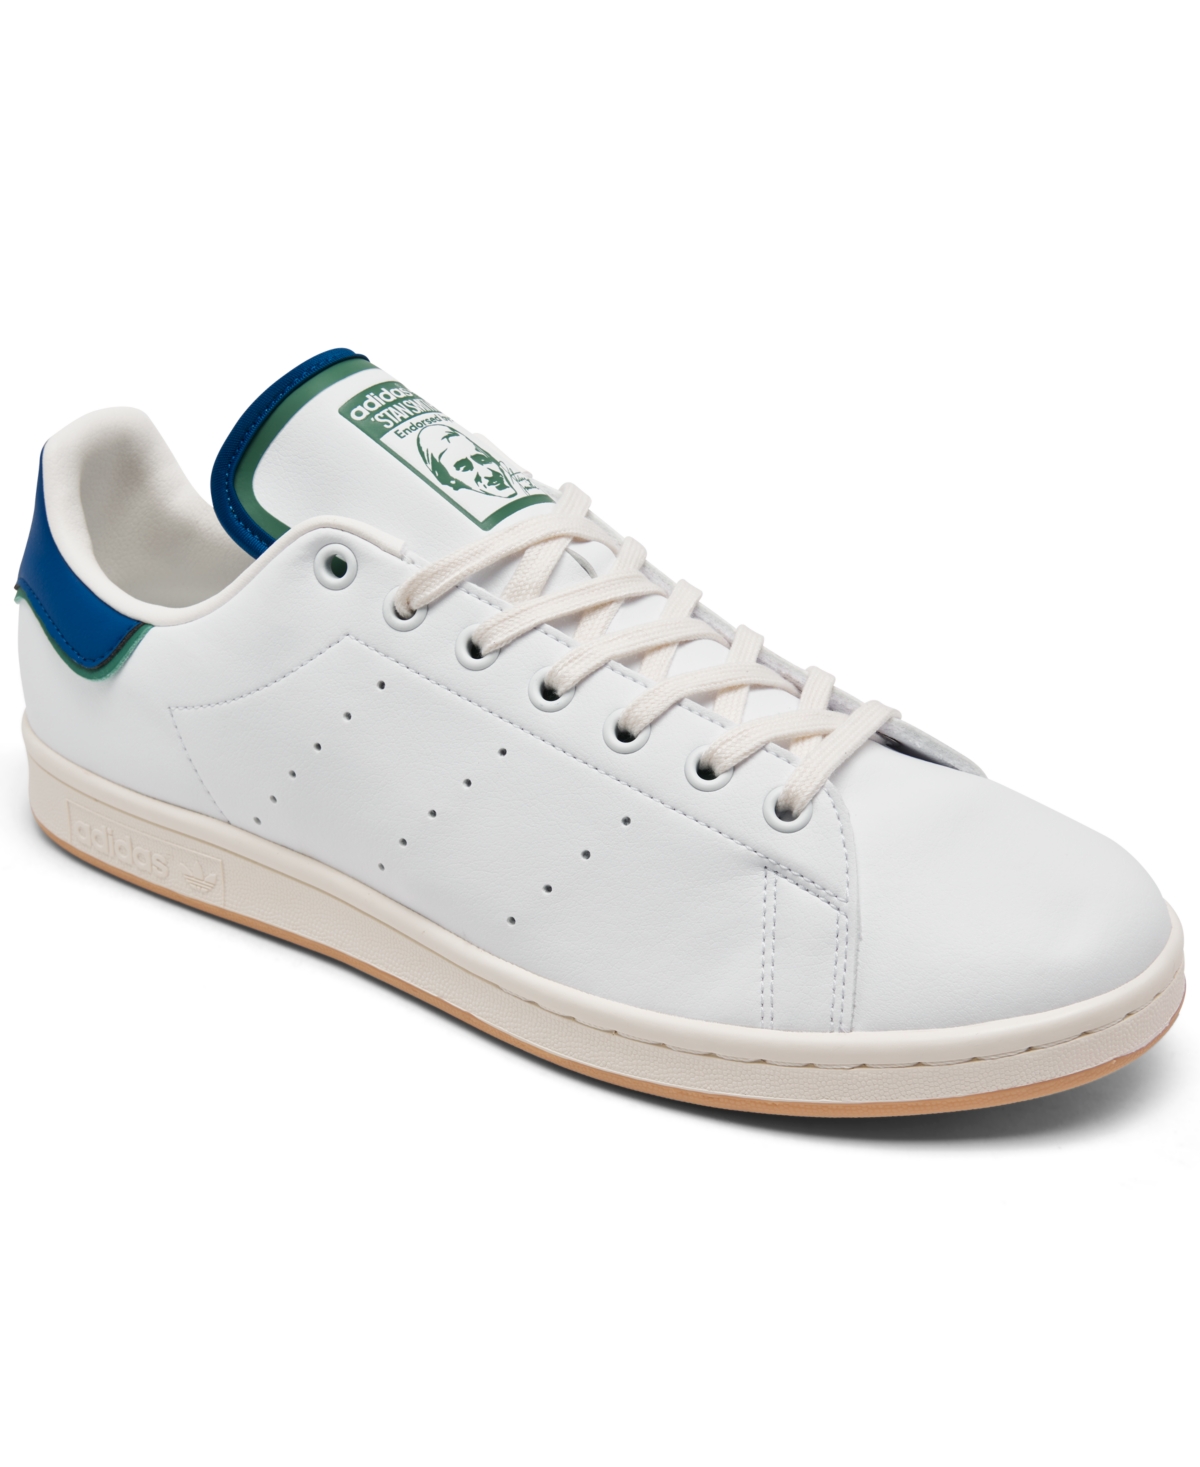 adidas Men's Originals Stan Smith Casual Sneakers from Finish Line